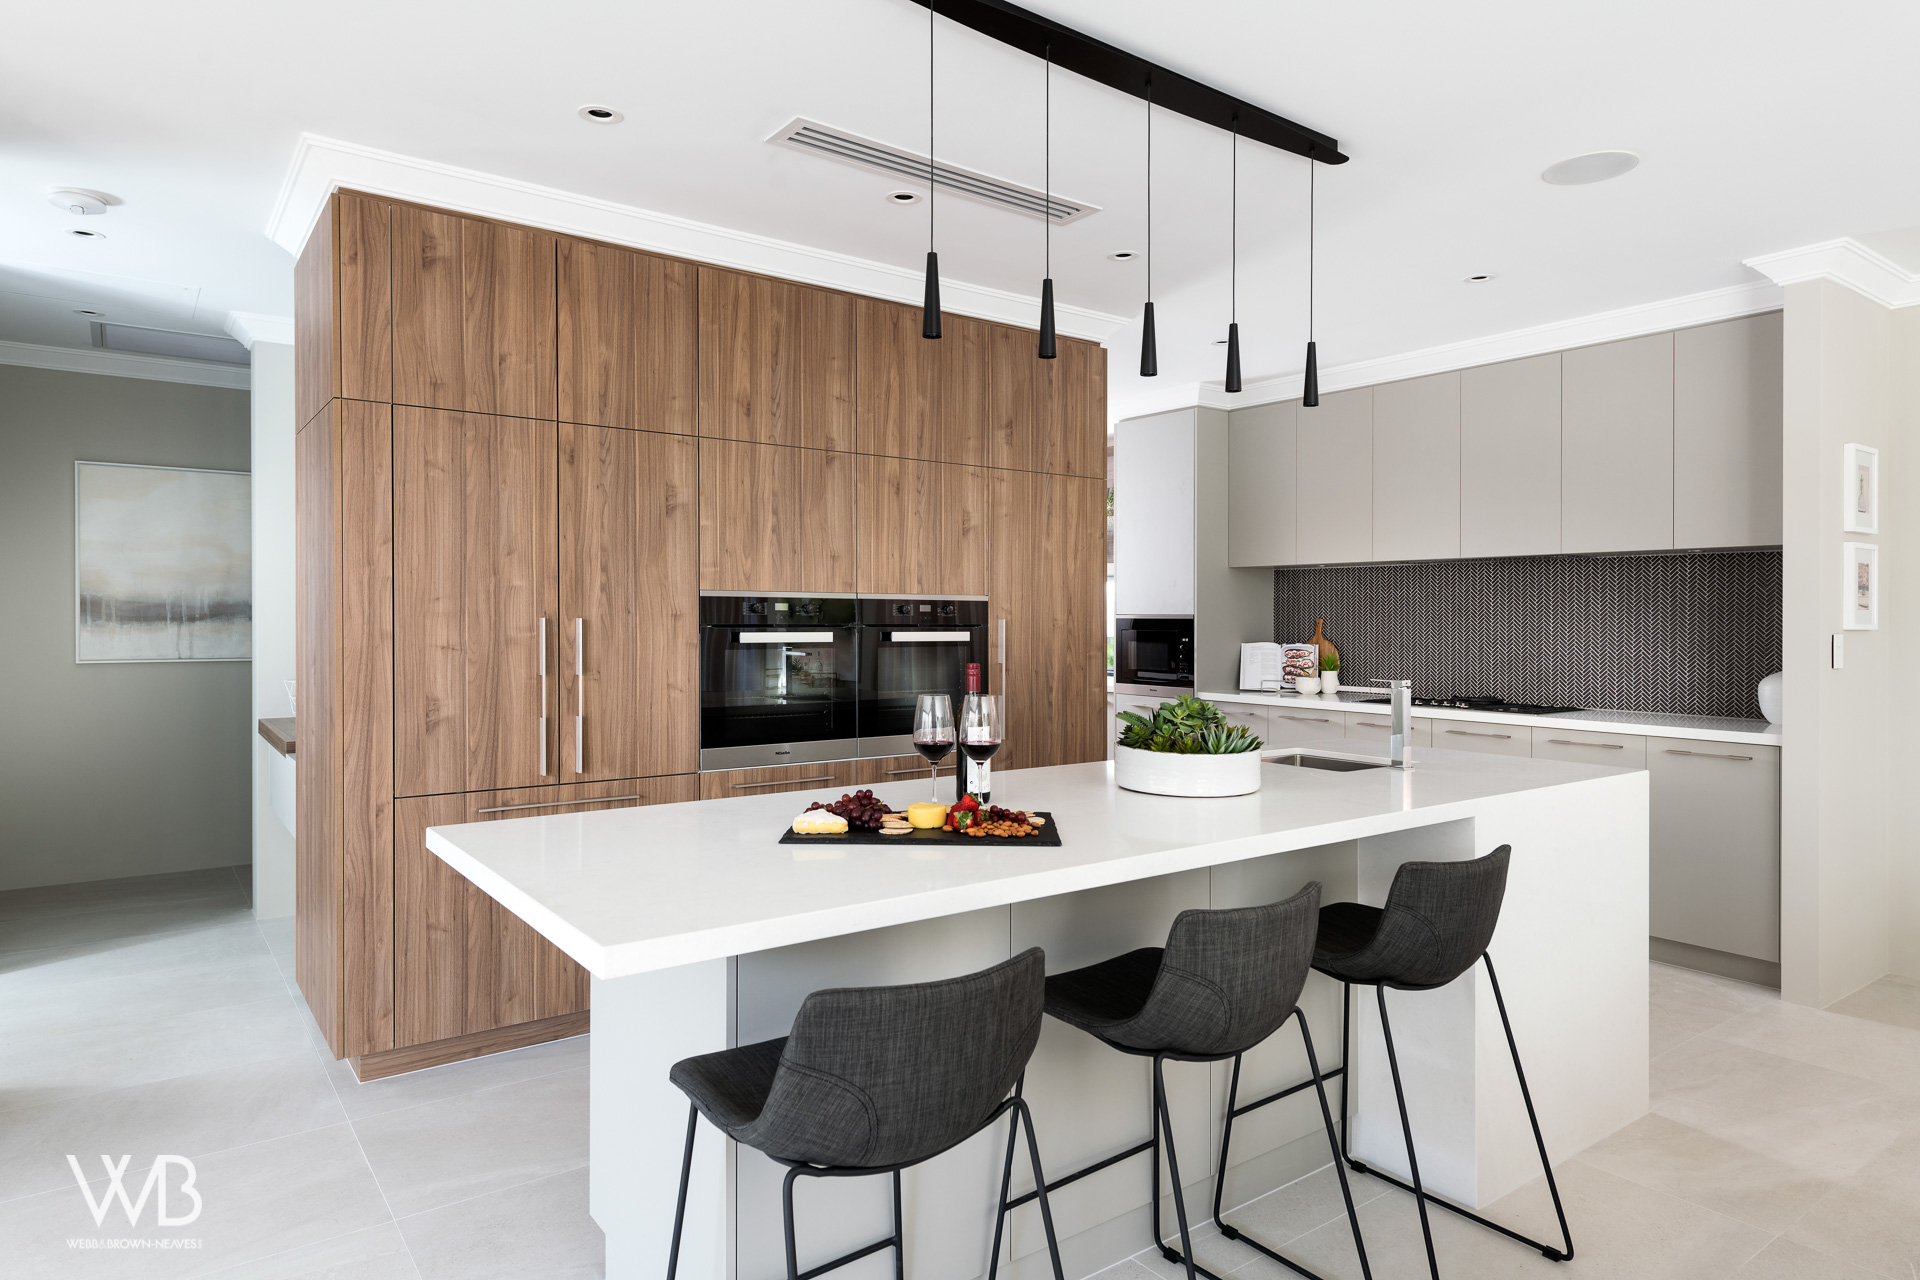  Kitchen designed by Jess O’Shea Designs for Webb and Brown-Neaves. Moda Display home. Made by The Maker Designer Kitchens. Dianella, Perth, Western Australia 